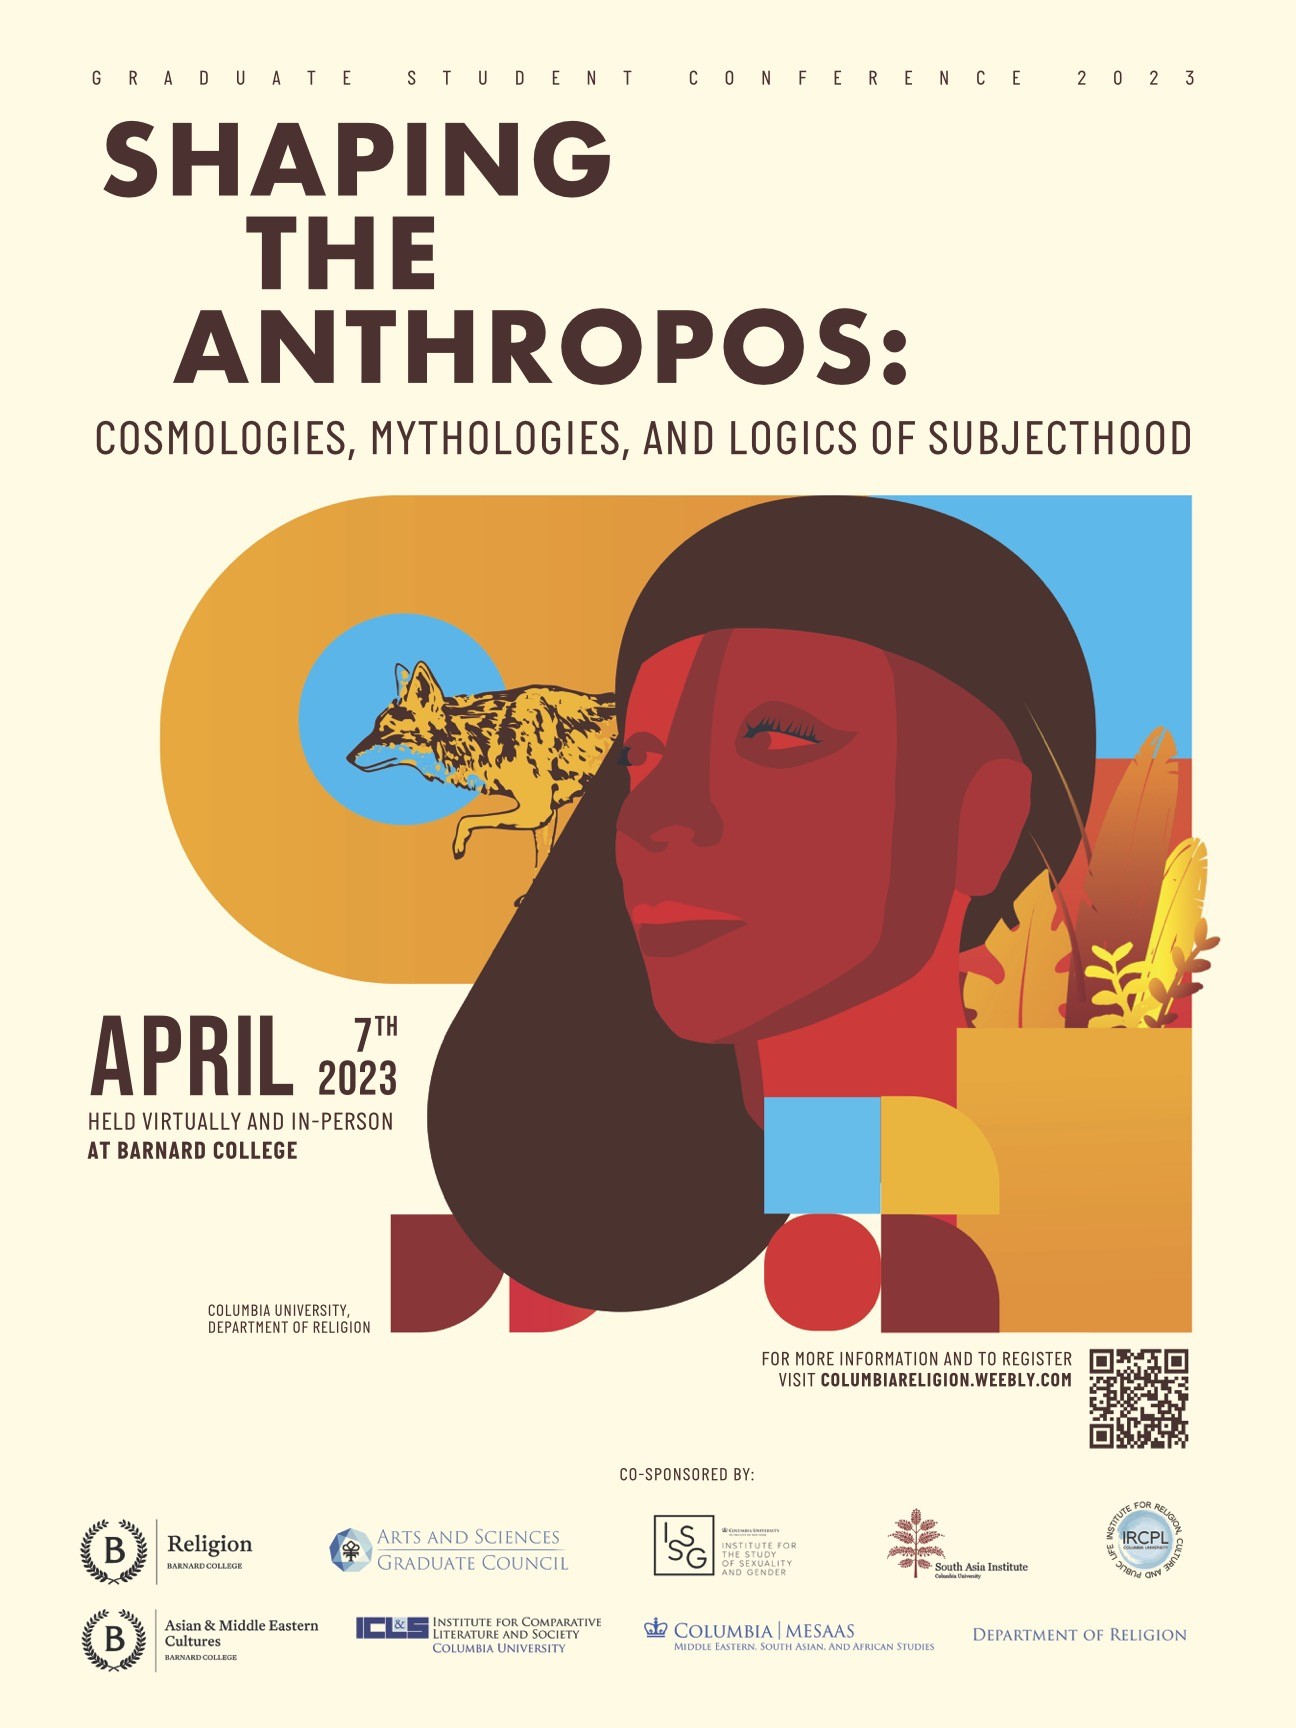 Religion Department Graduate Student Conference Shaping the Anthropos: Cosmologies, Mythologies and Logics of Subjecthood